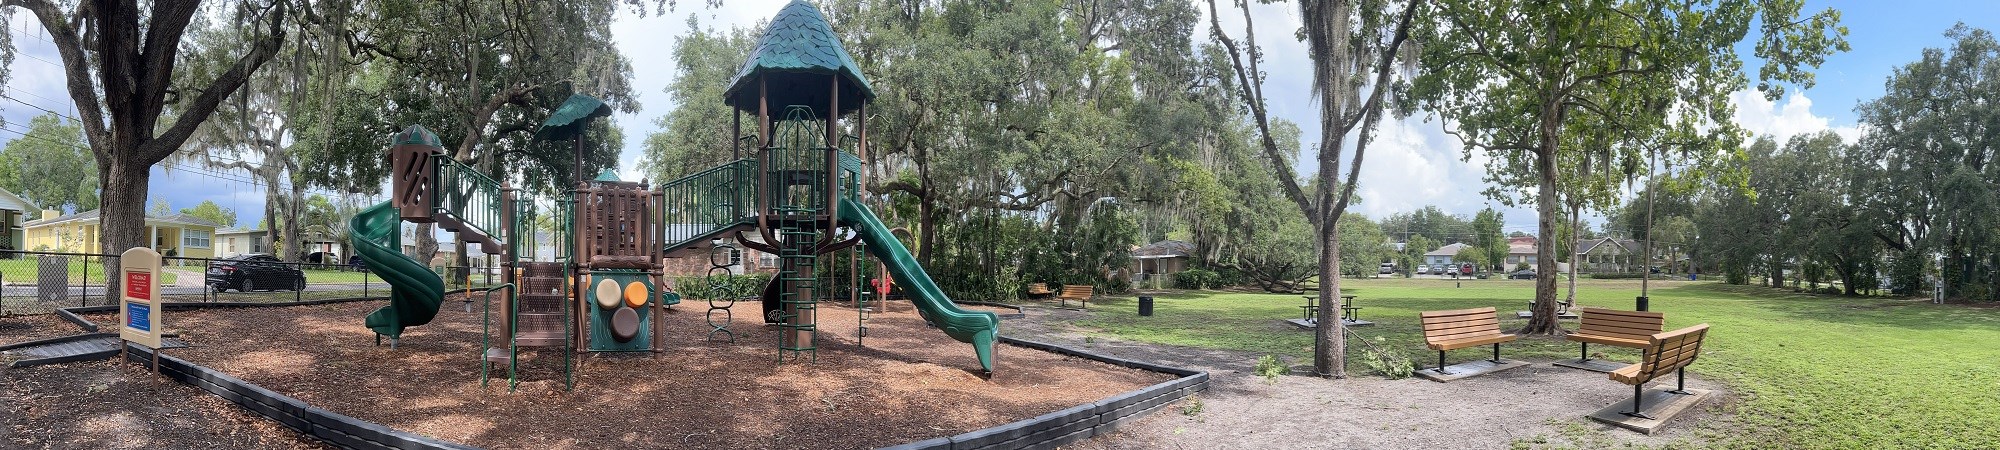 Photo of Horney Park. Picture features a playground set on the right and a grassy field with a bench on the left.